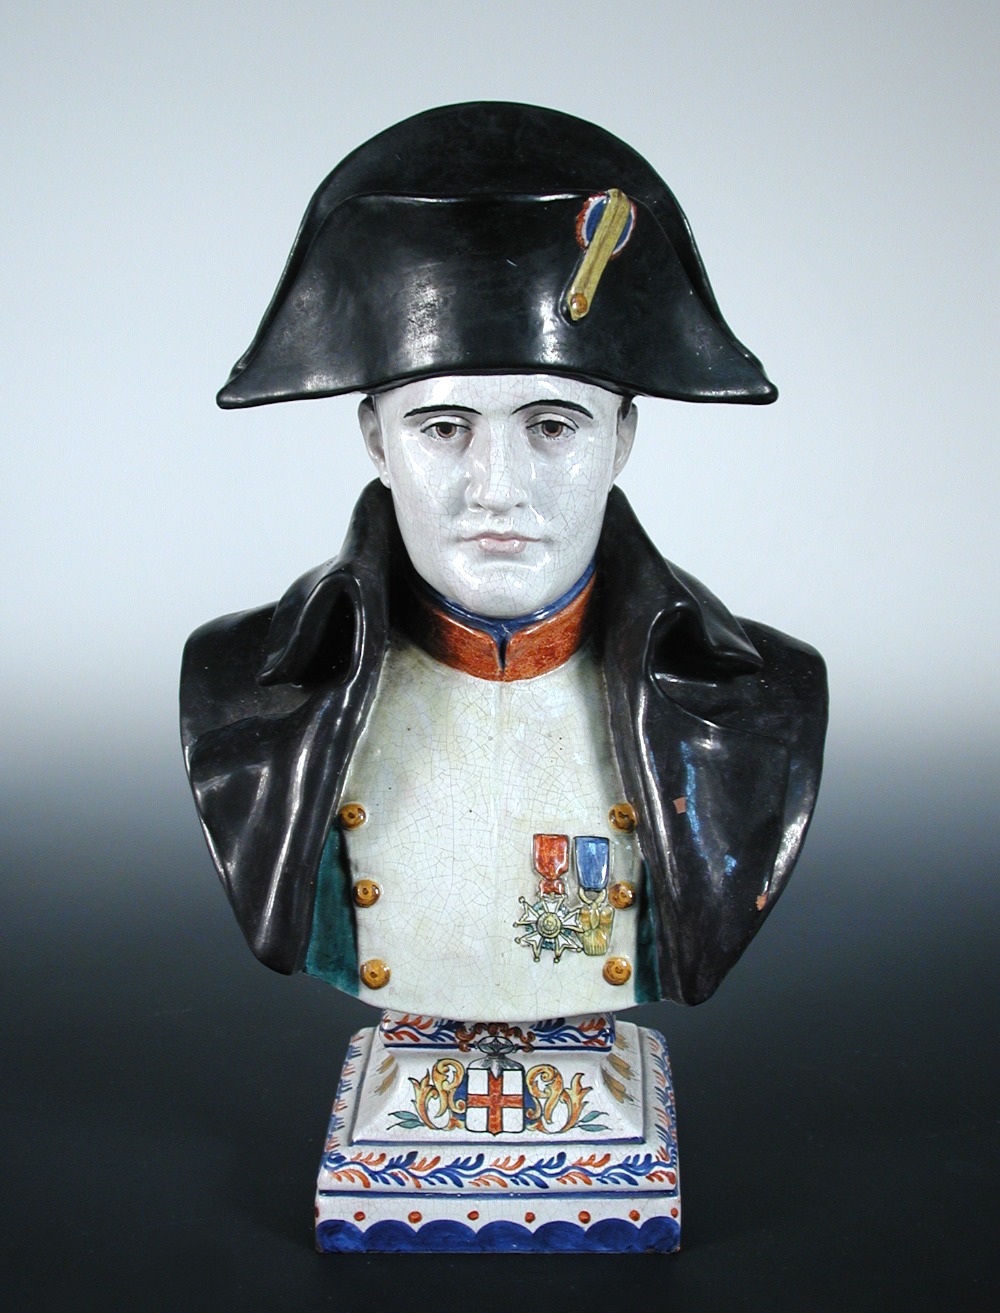 A late 19th/early 20th century French faience bust of Napoleon dressed in usual military attire and